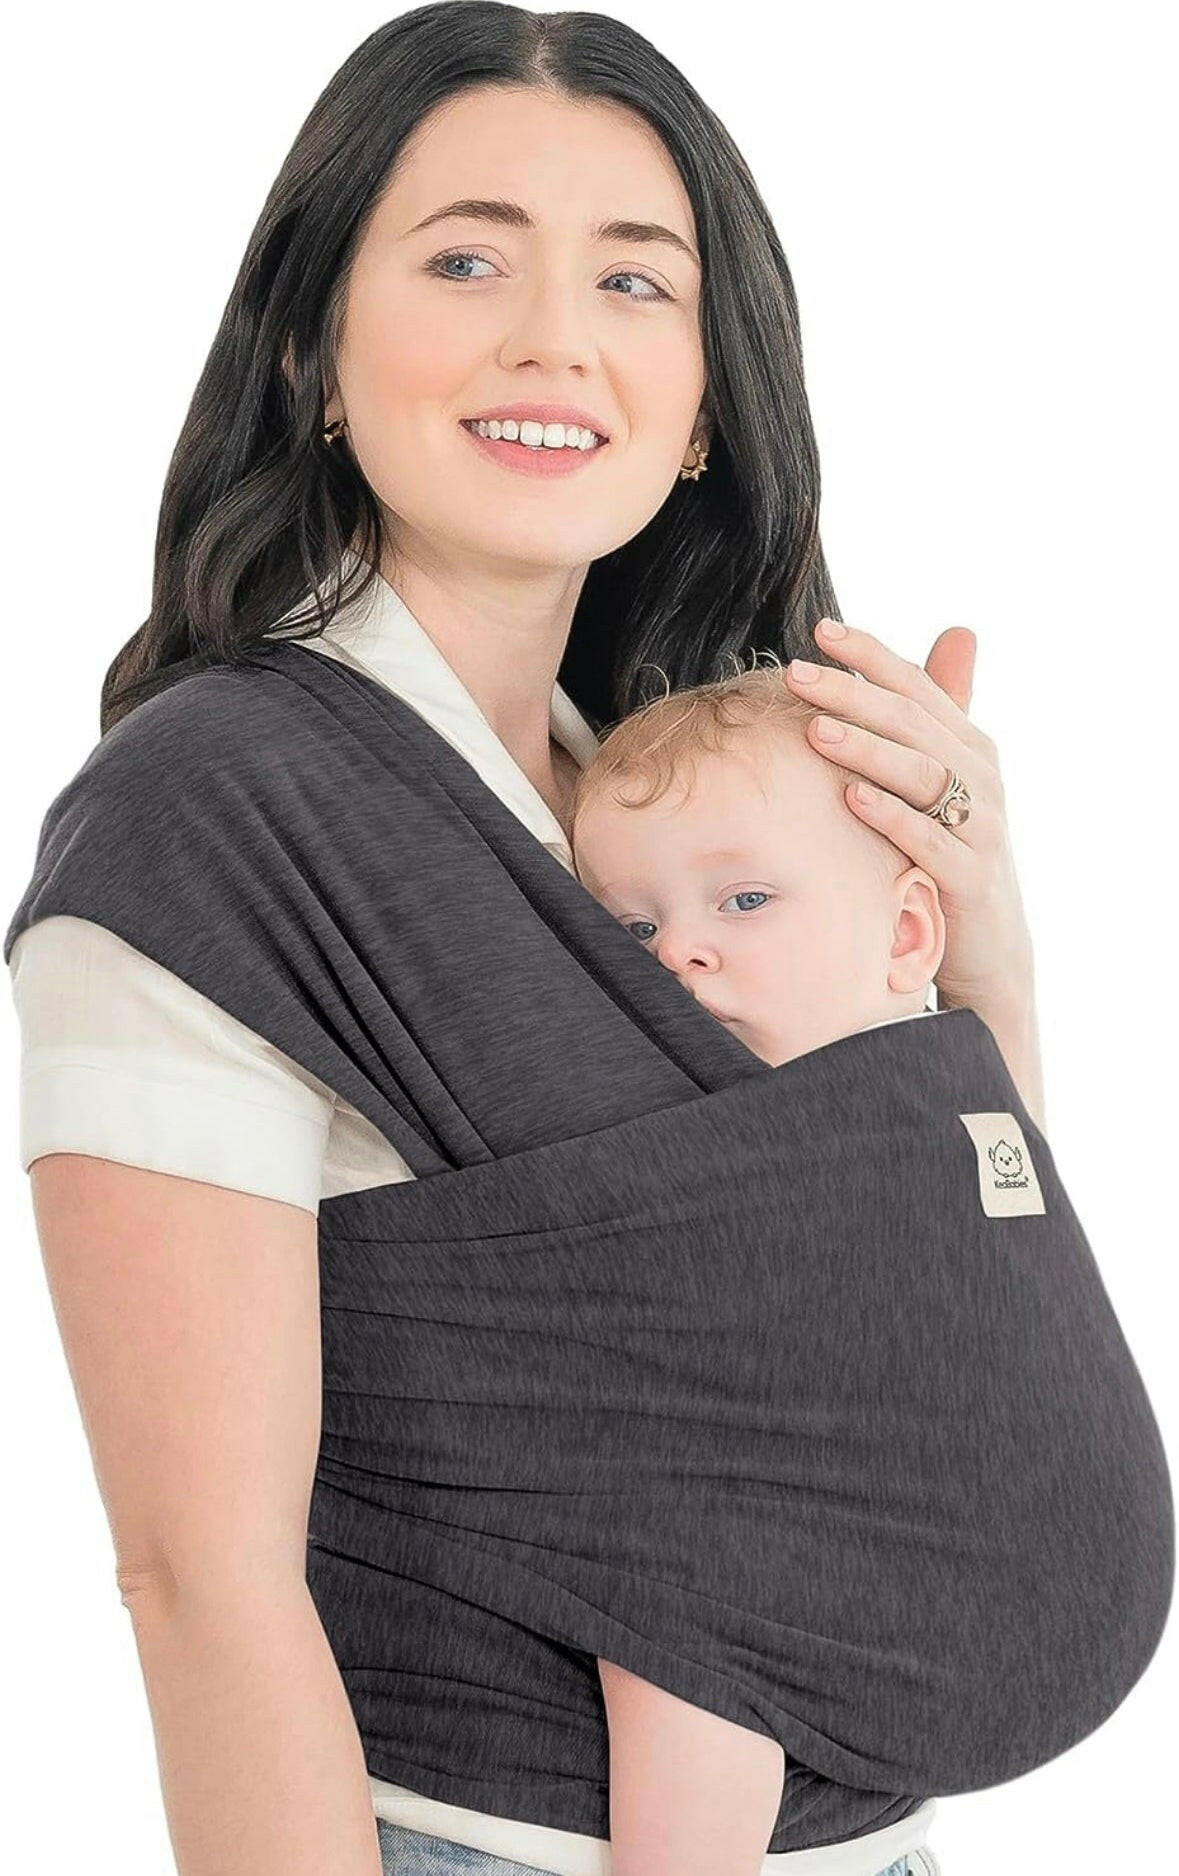 KeaBabies Baby Wrap Carrier - All in 1 Original Breathable Baby Sling.